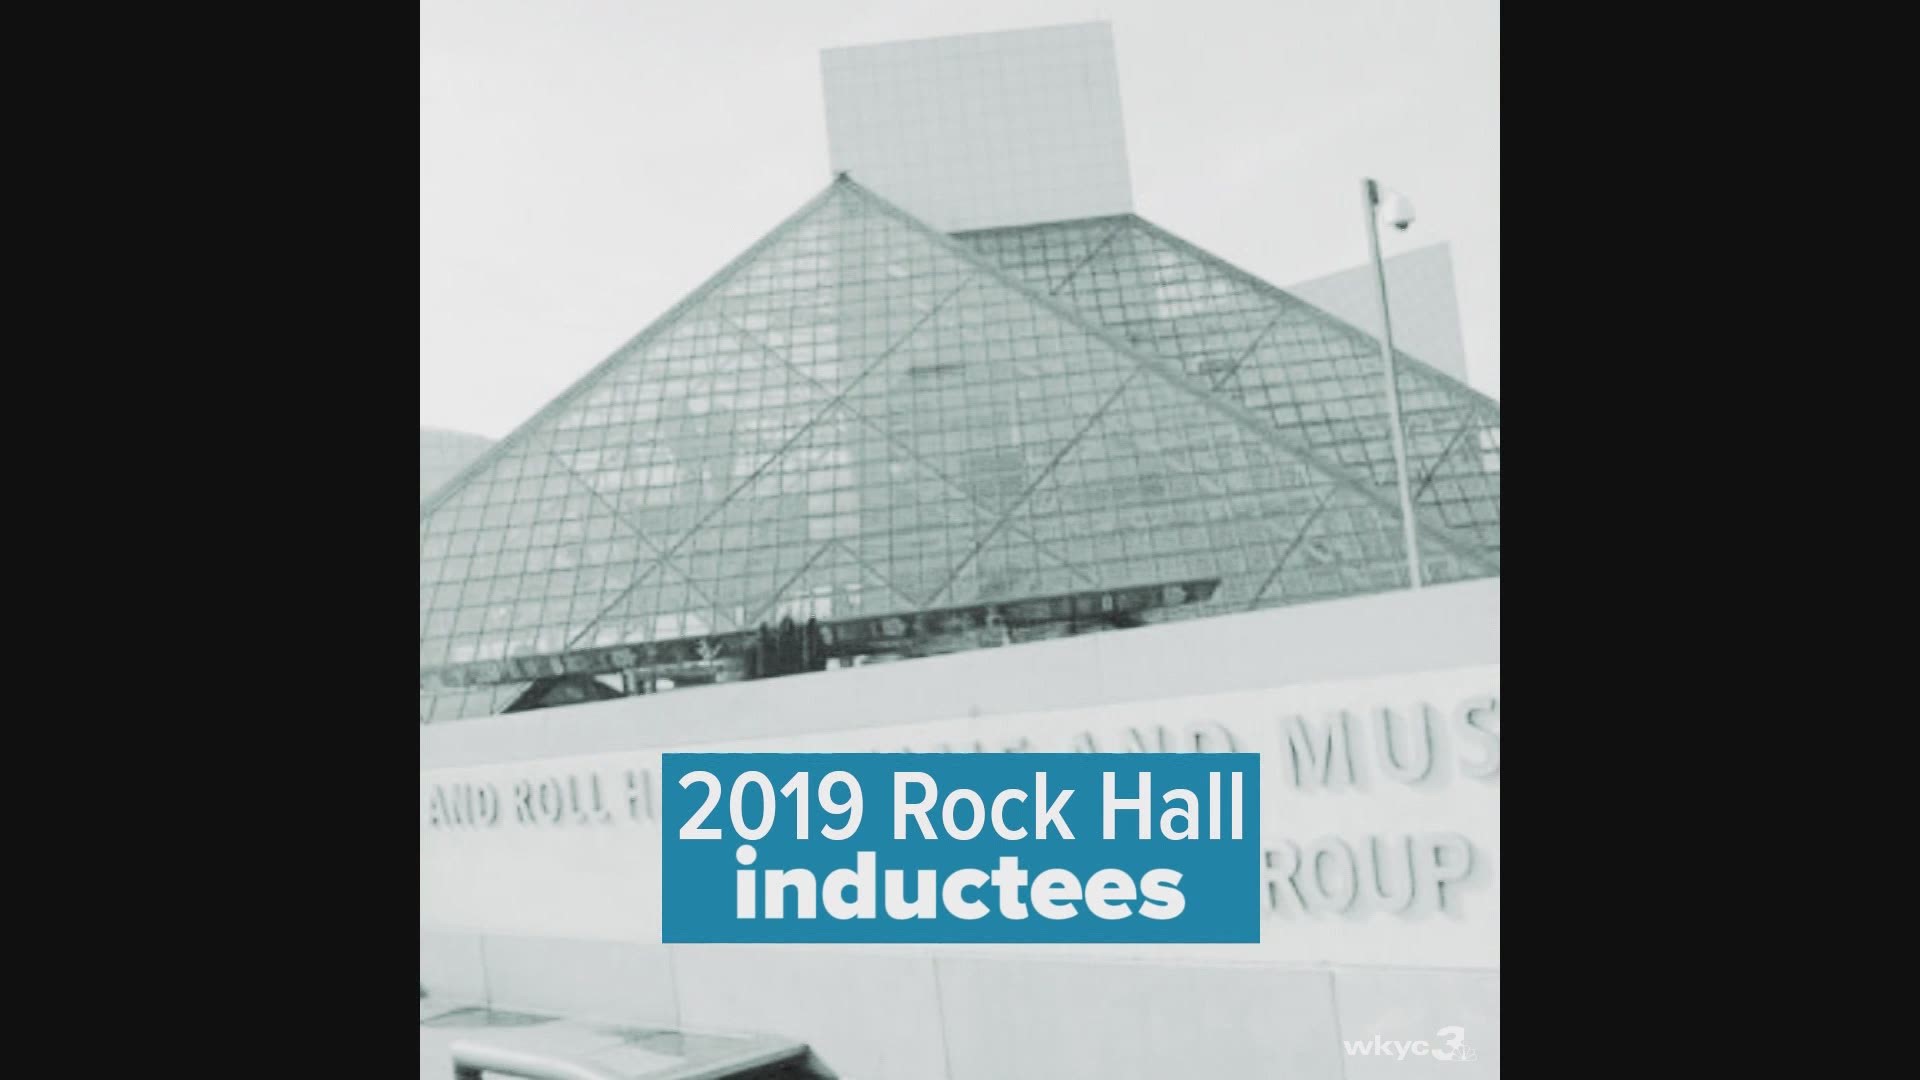 There are seven new inductees being cemented in music history as the Rock and Roll Hall of Fame announces its class of 2019 joining Cleveland's hallowed hall.